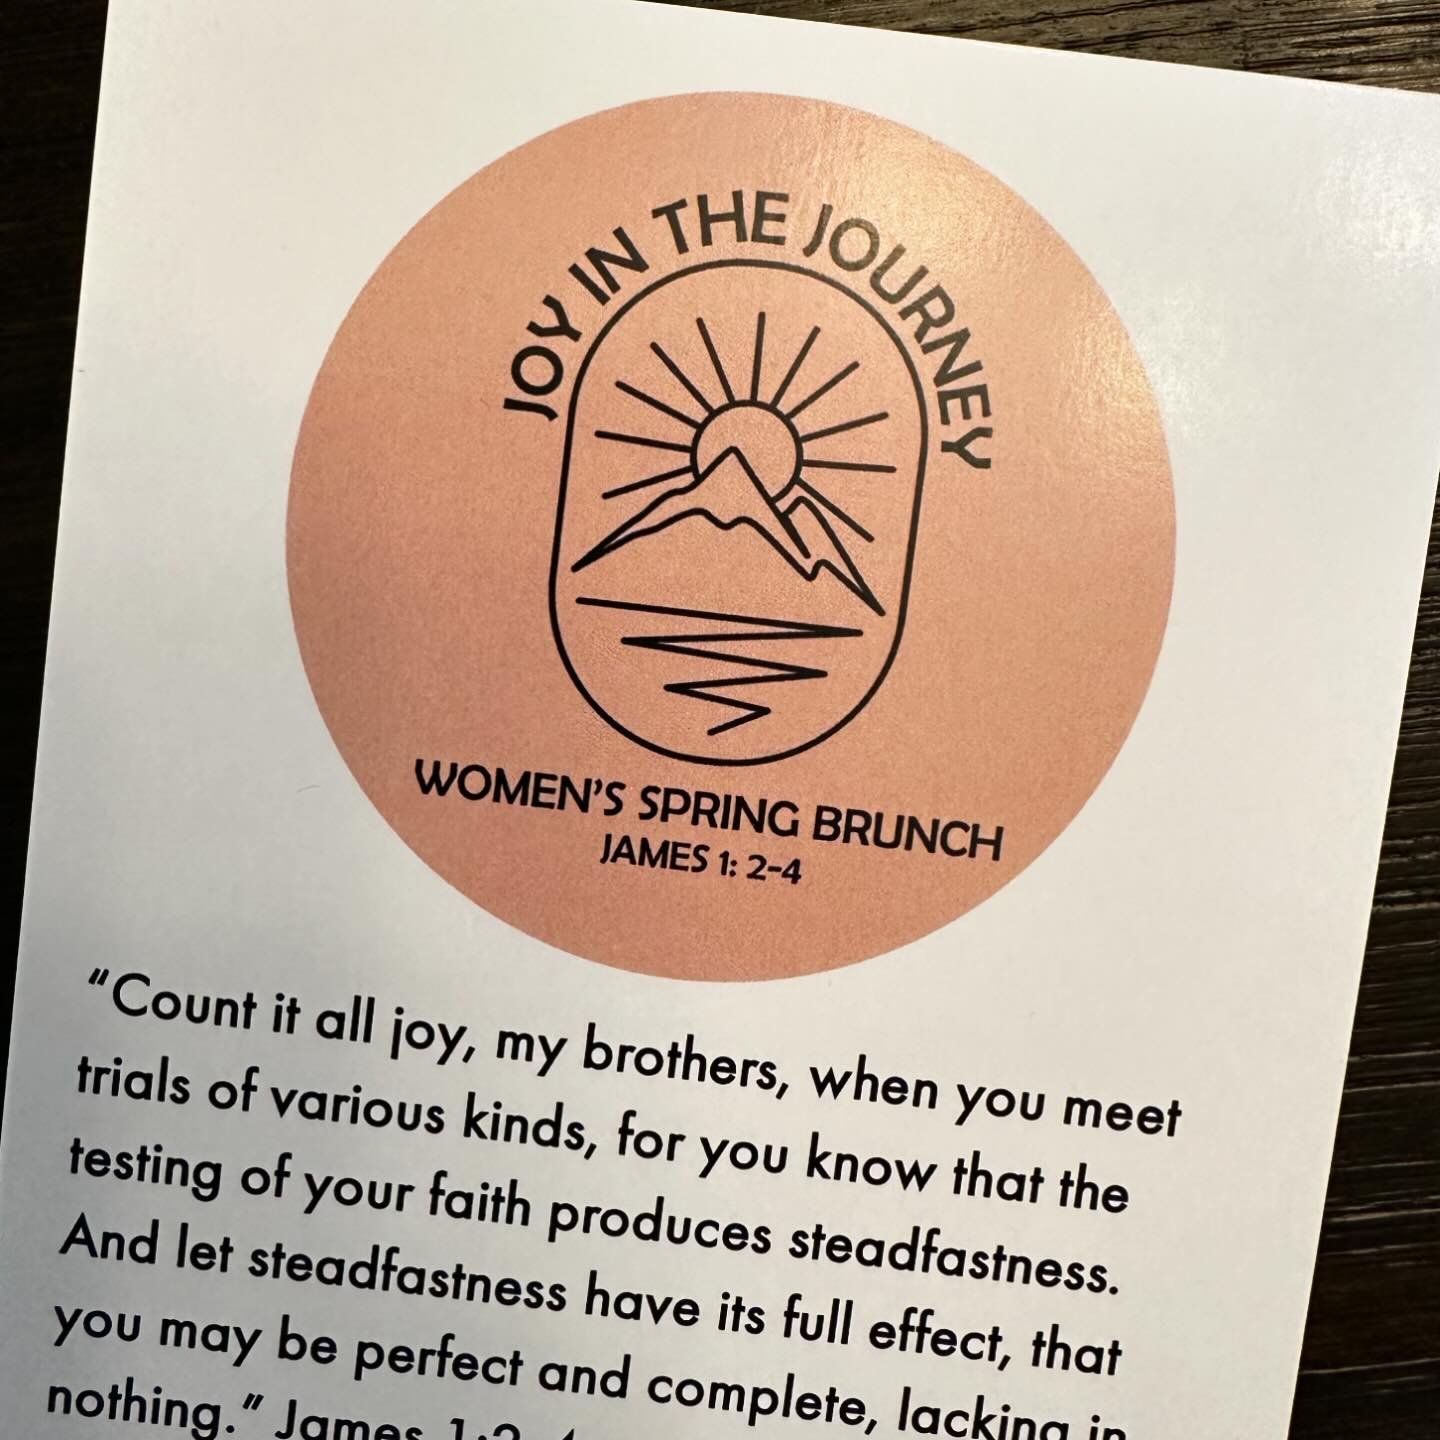 Today at the women&rsquo;s brunch we heard inspiring and vulnerable stories about how four women found joy in the journey! They shared about God&rsquo;s faithfulness throughout trials, and how the presence of the Lord sustained them. 

We are gratefu